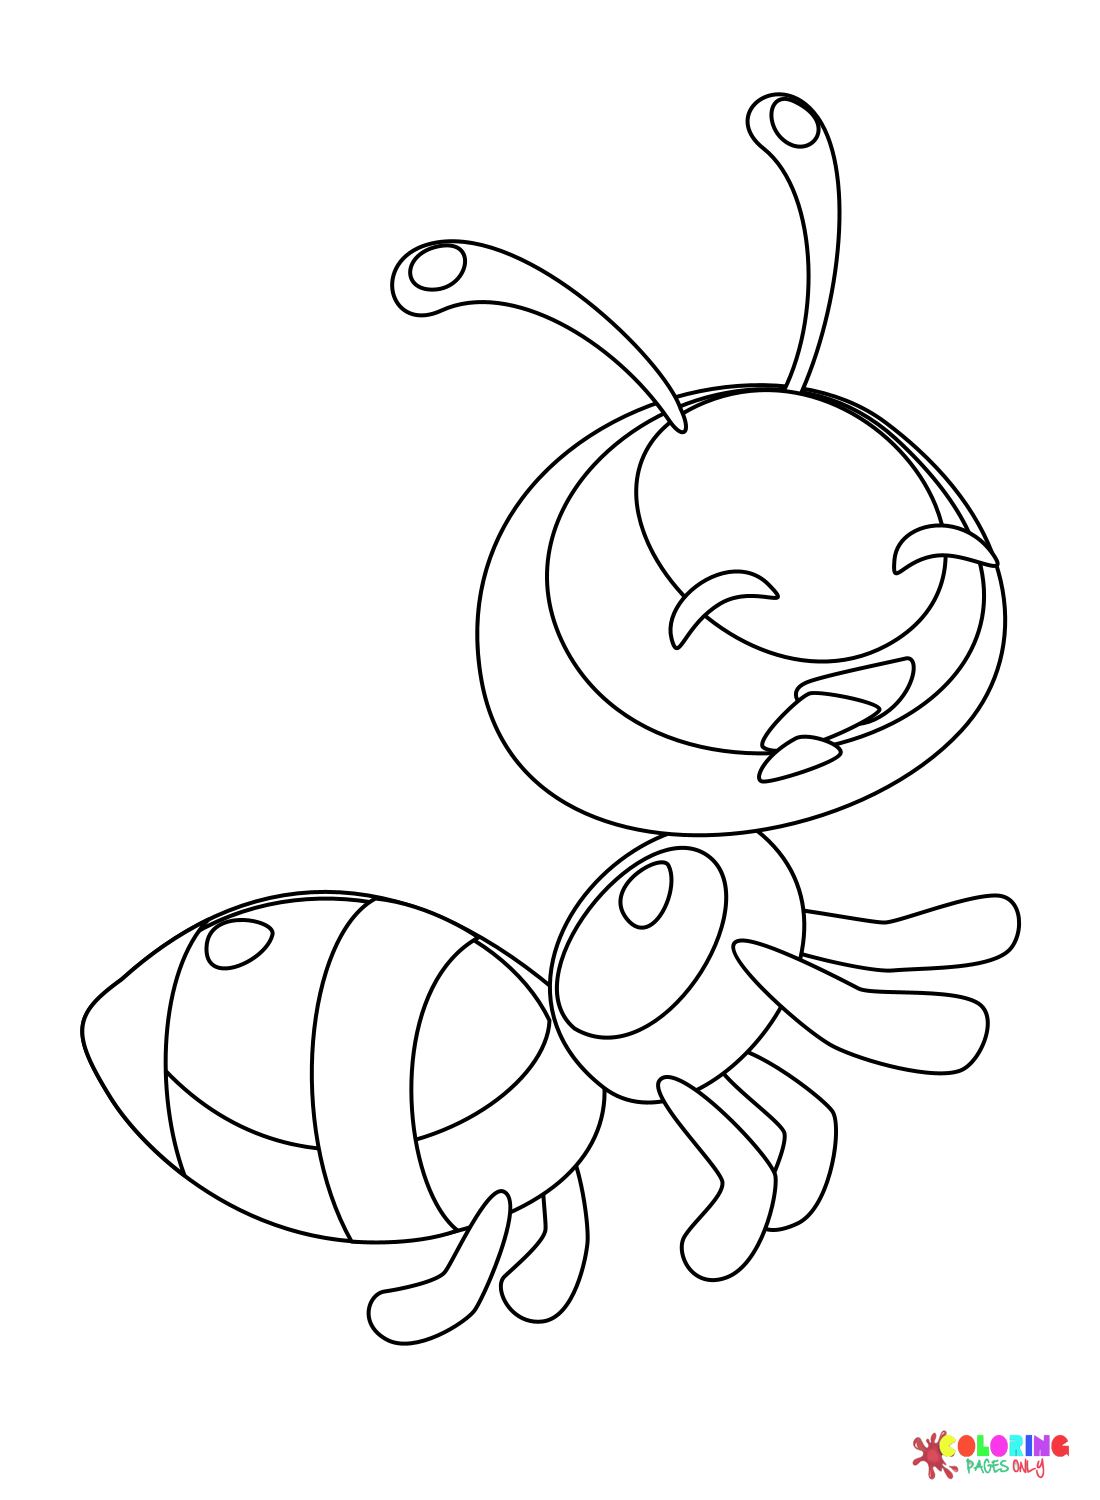 Crying Ant Coloring Page